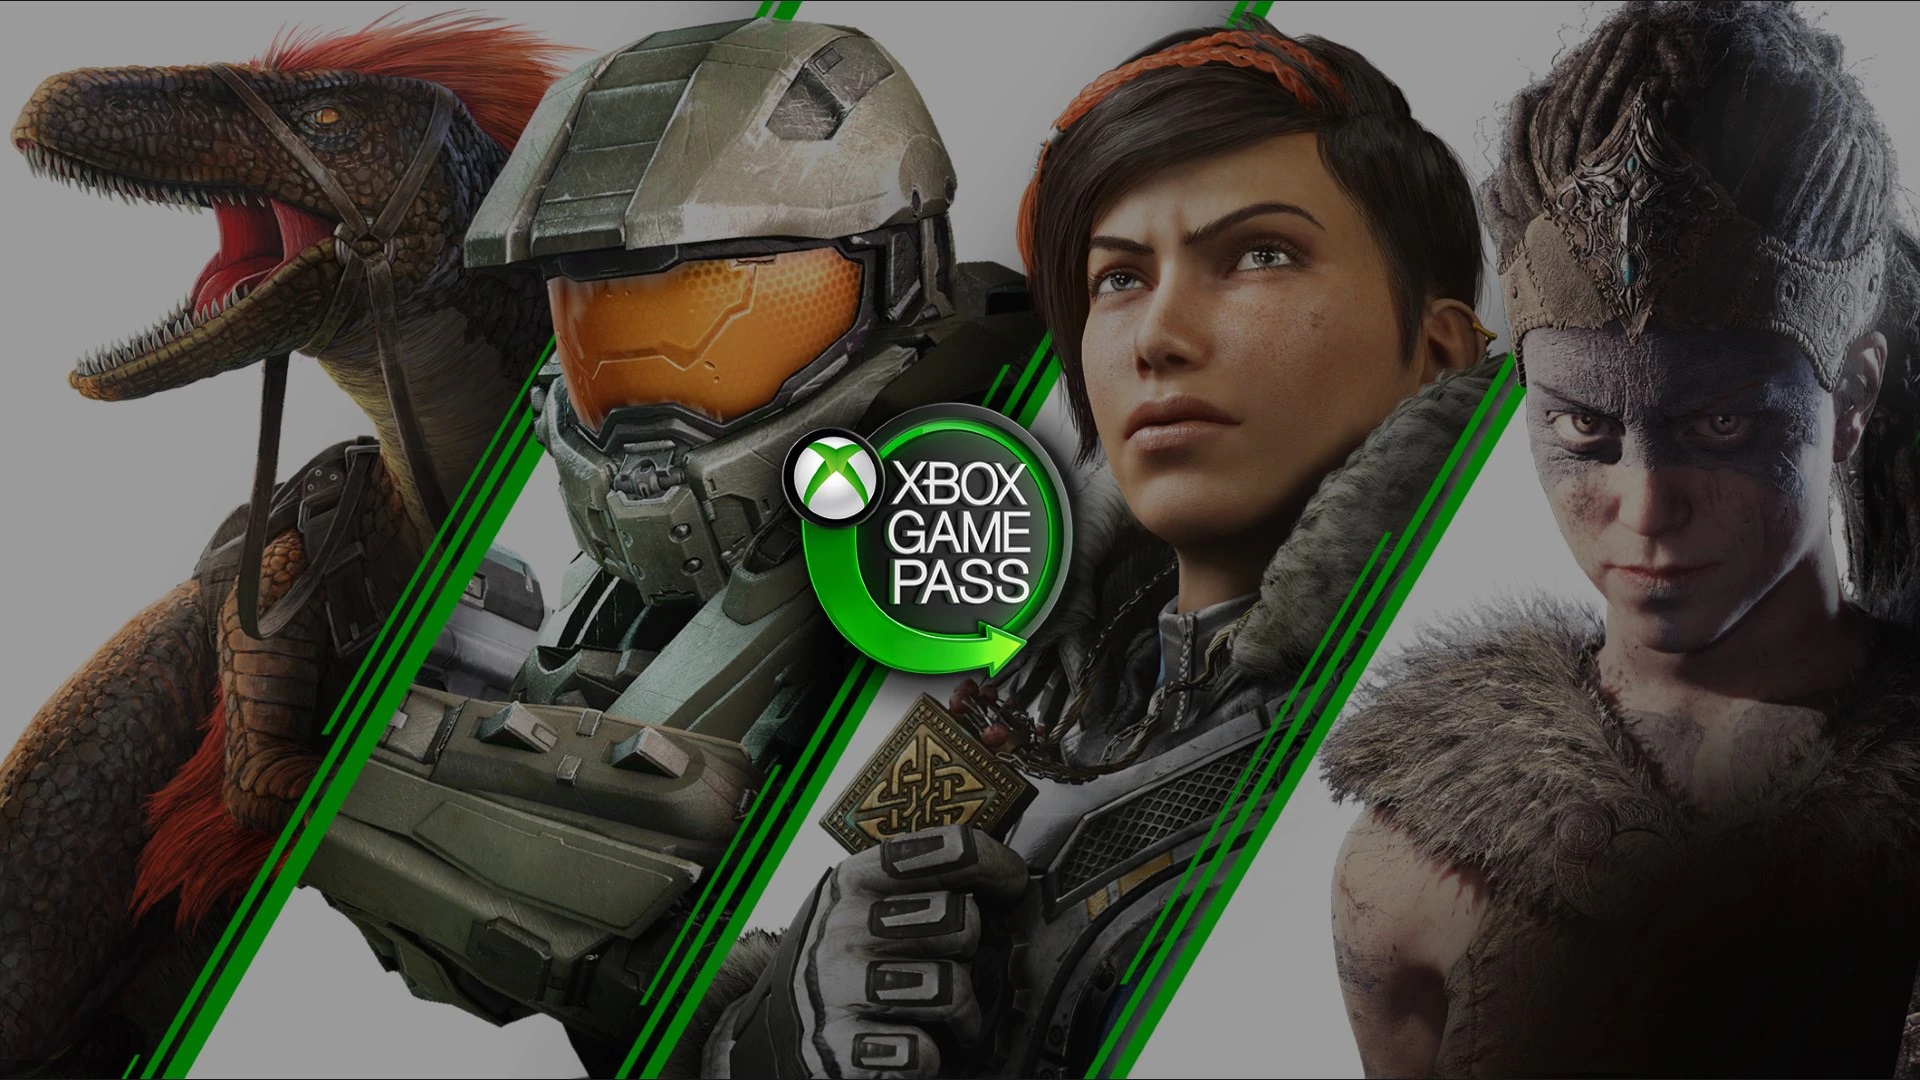 Xbox Cloud Gaming launches on Meta Quest [Video]